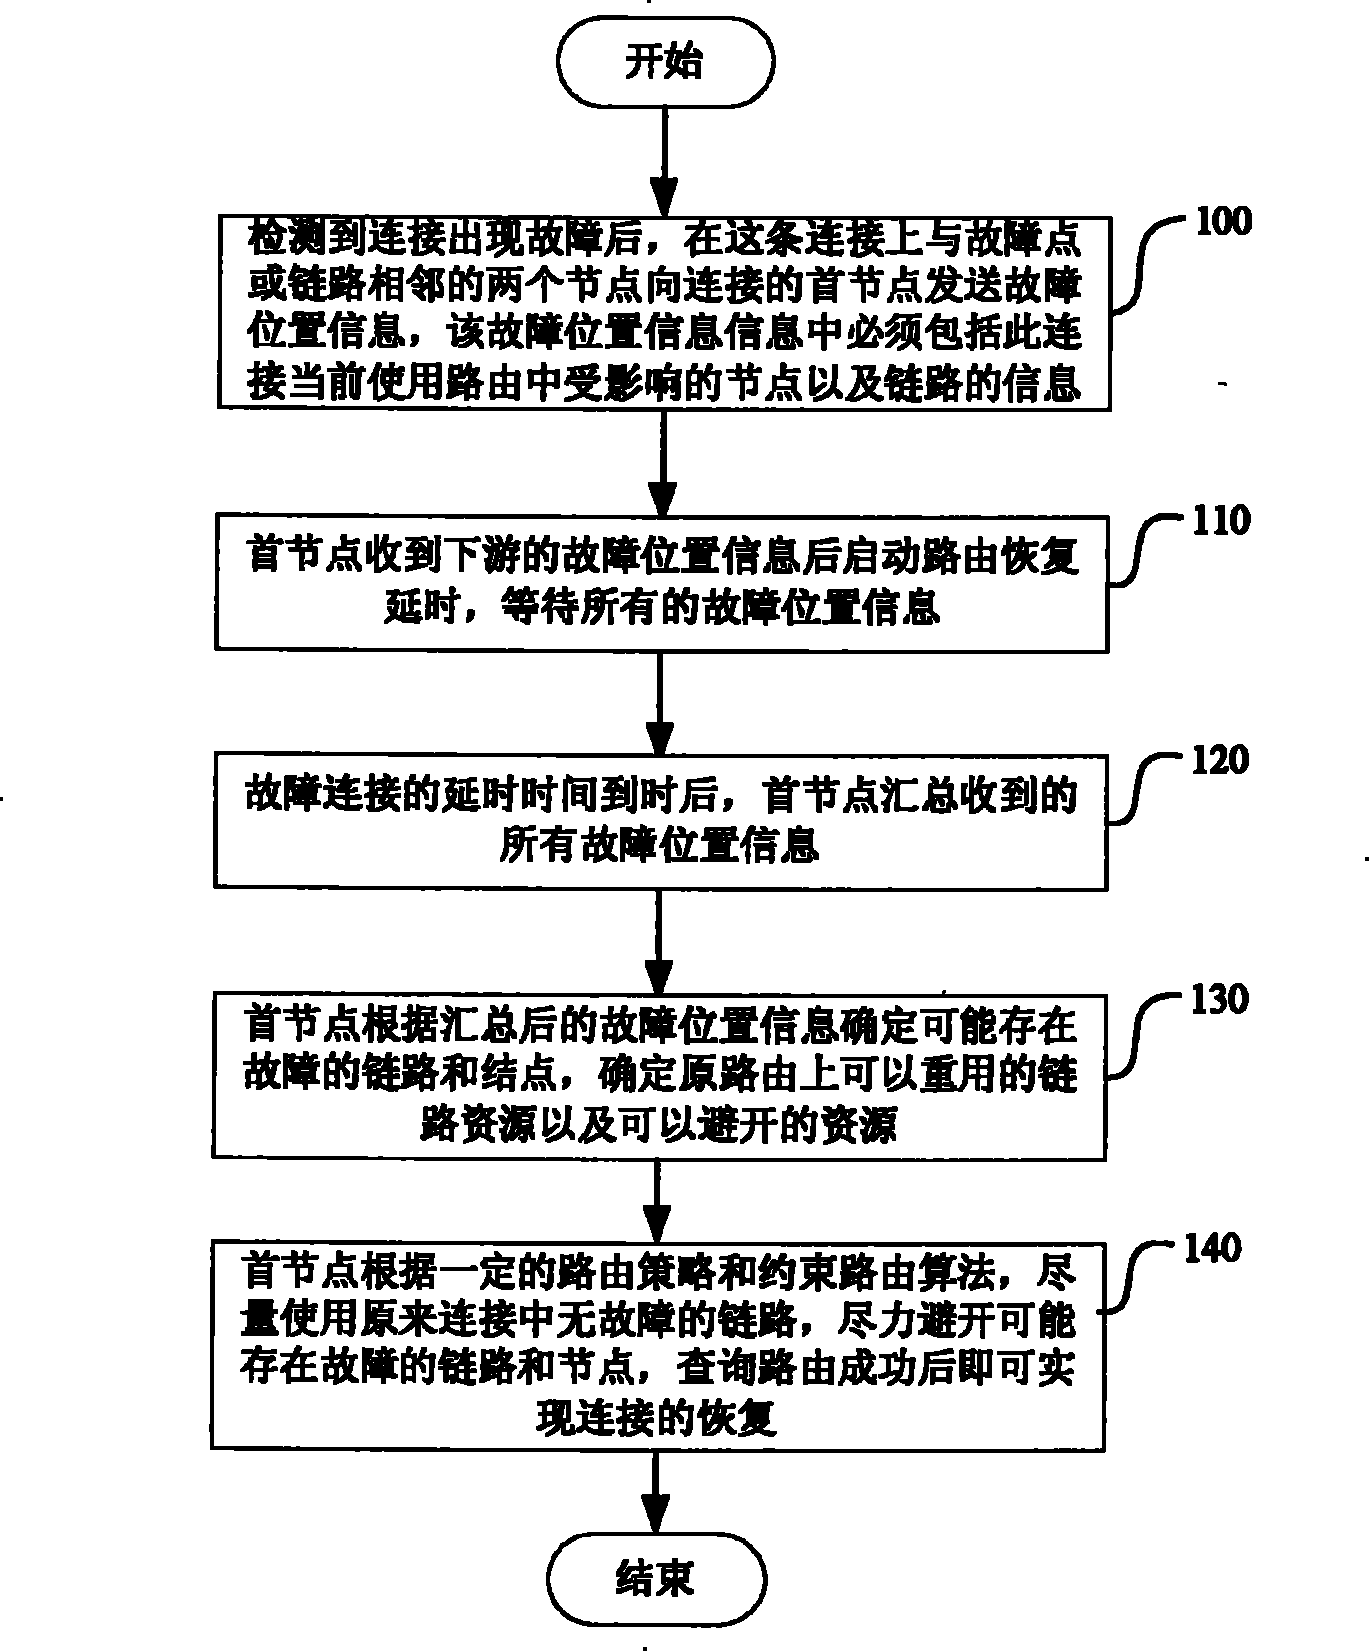 Route recovery method according to failure positioning in automatic exchange optical network